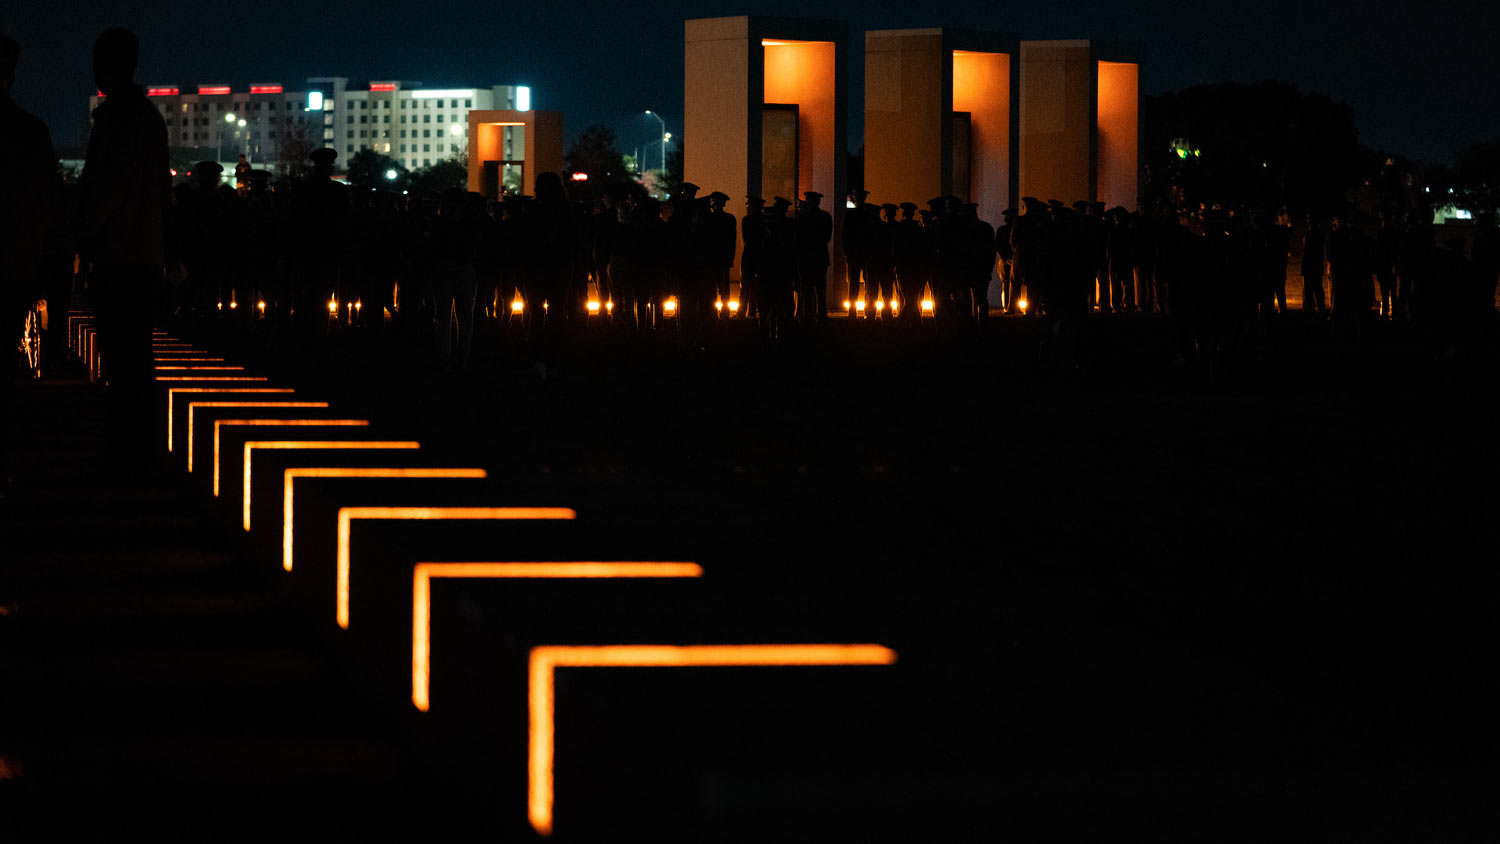 The history walk portion of the Bonfire Memorial lit up at night,